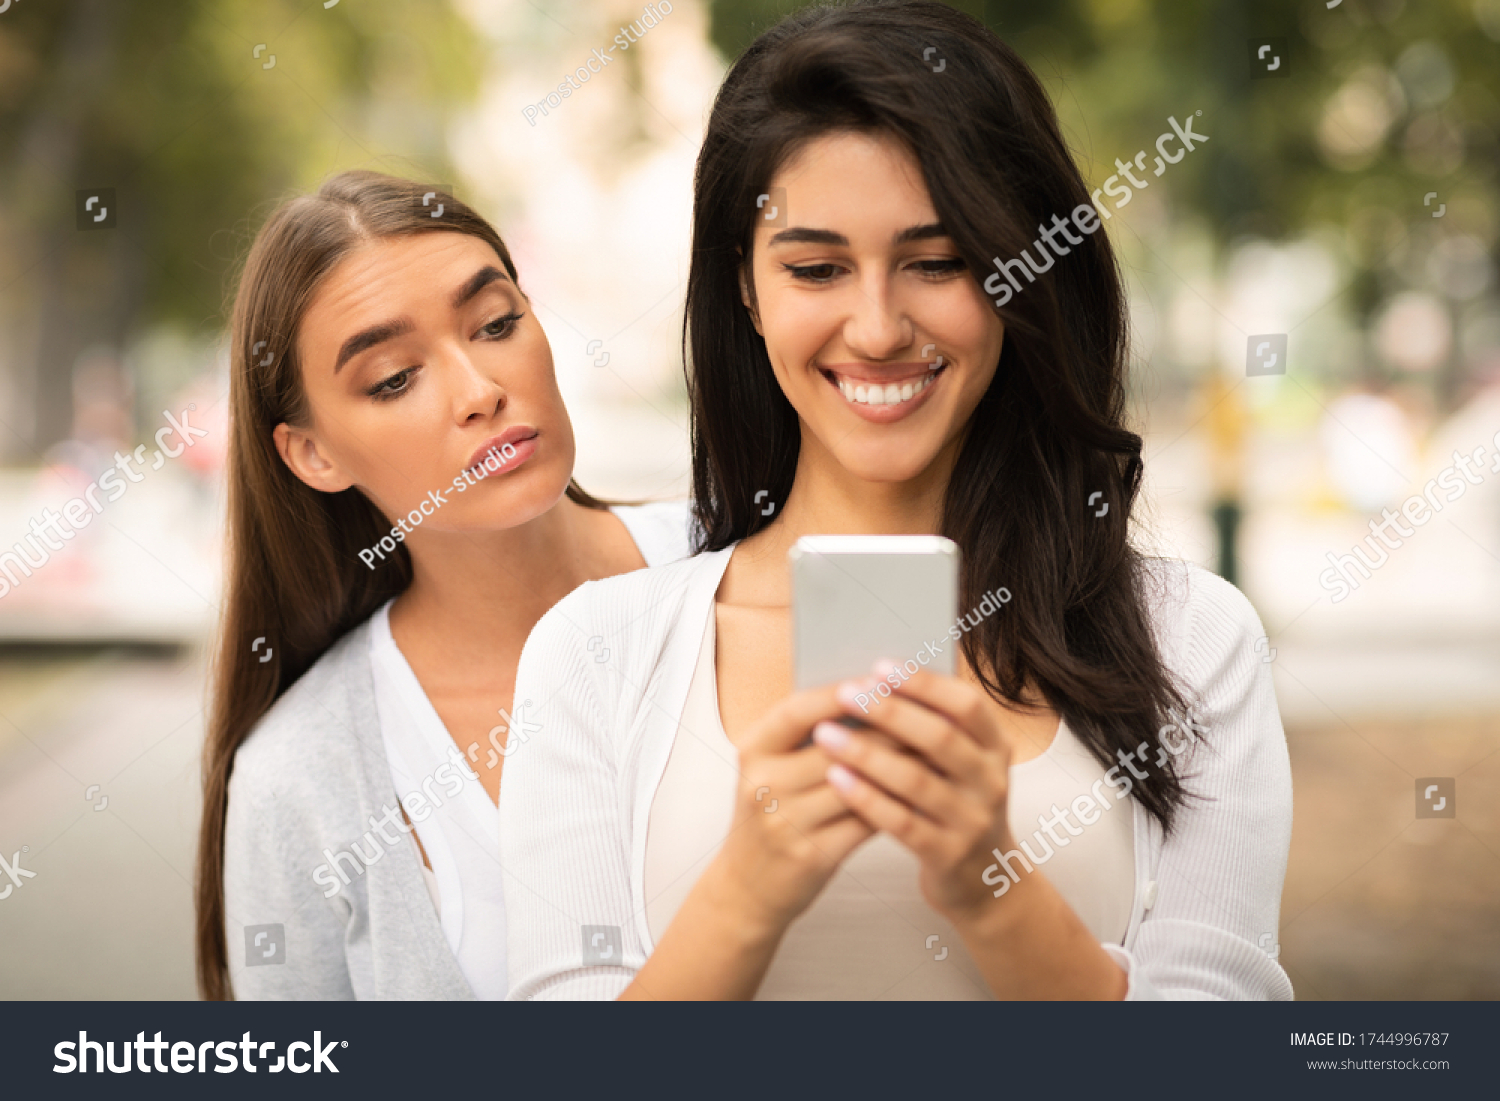 Jealous Friend. Envious Girl Peeking At Girlfriend's Phone While She Texting Walking Together Outdoors #1744996787